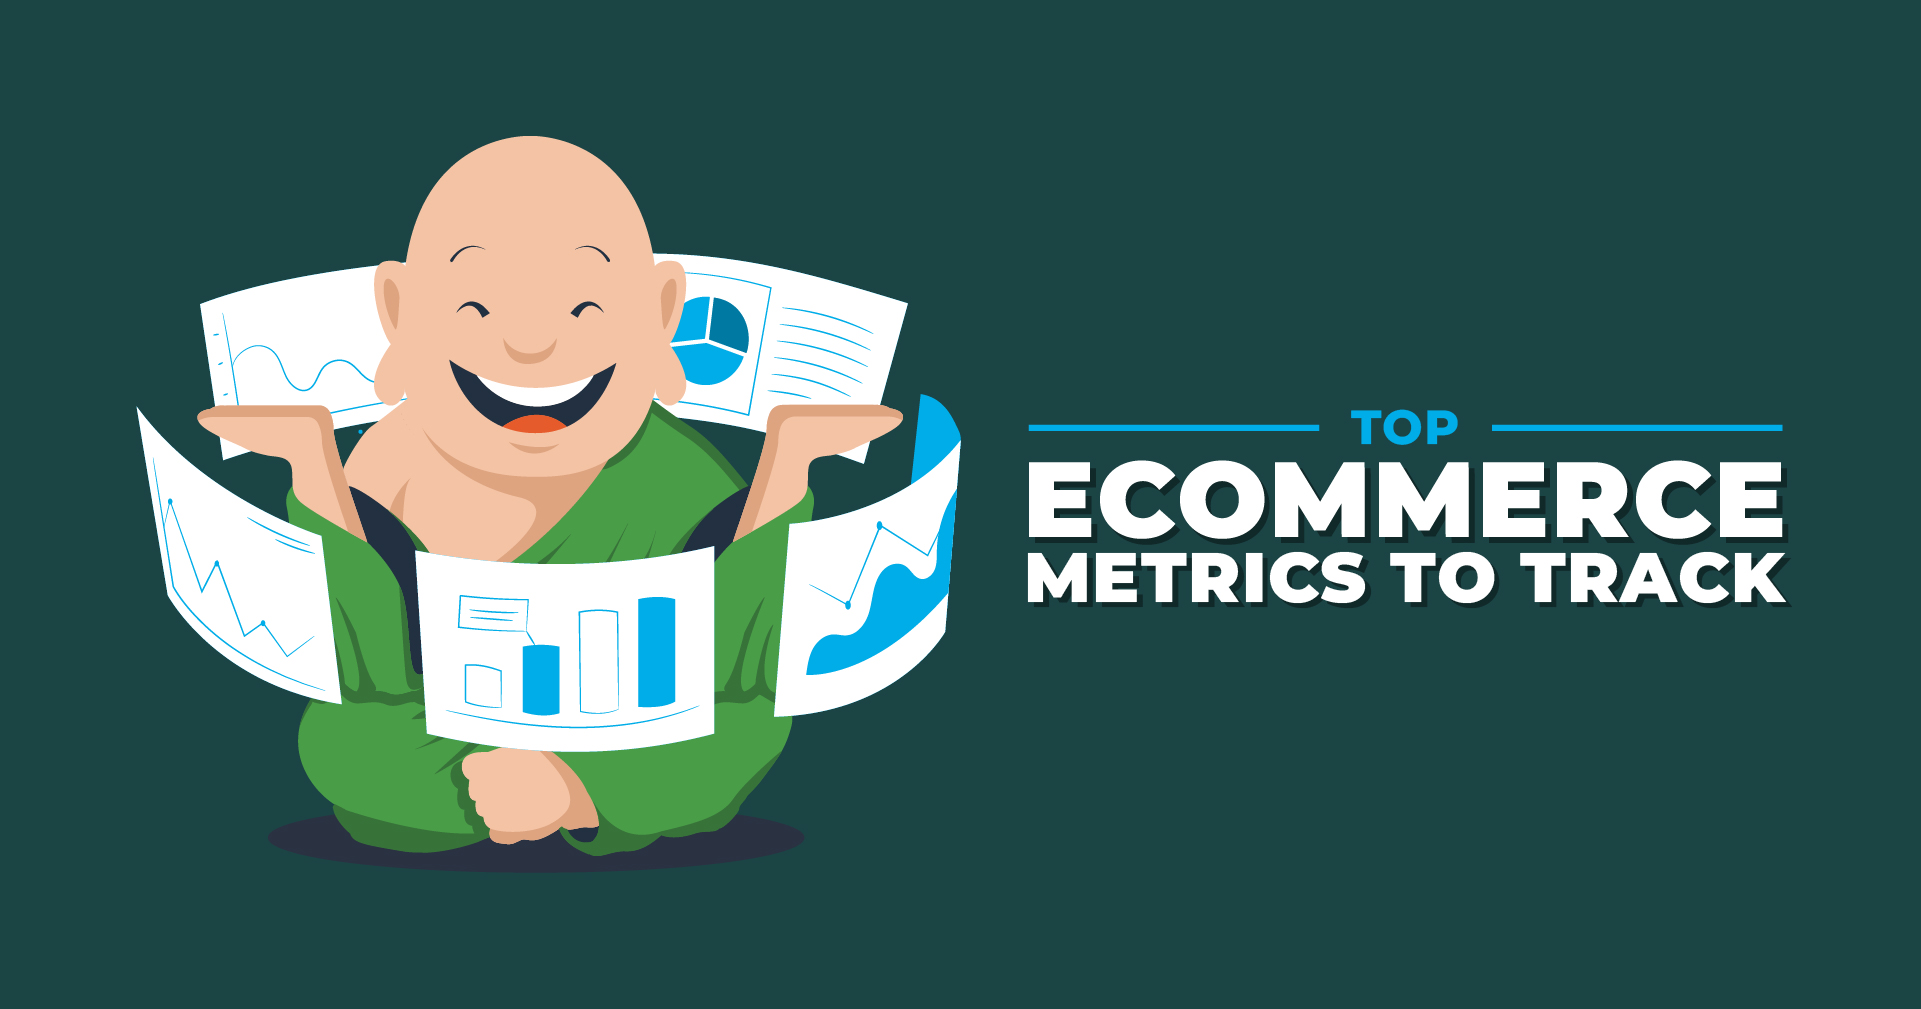 Top Ecommerce Business Metrics to Track